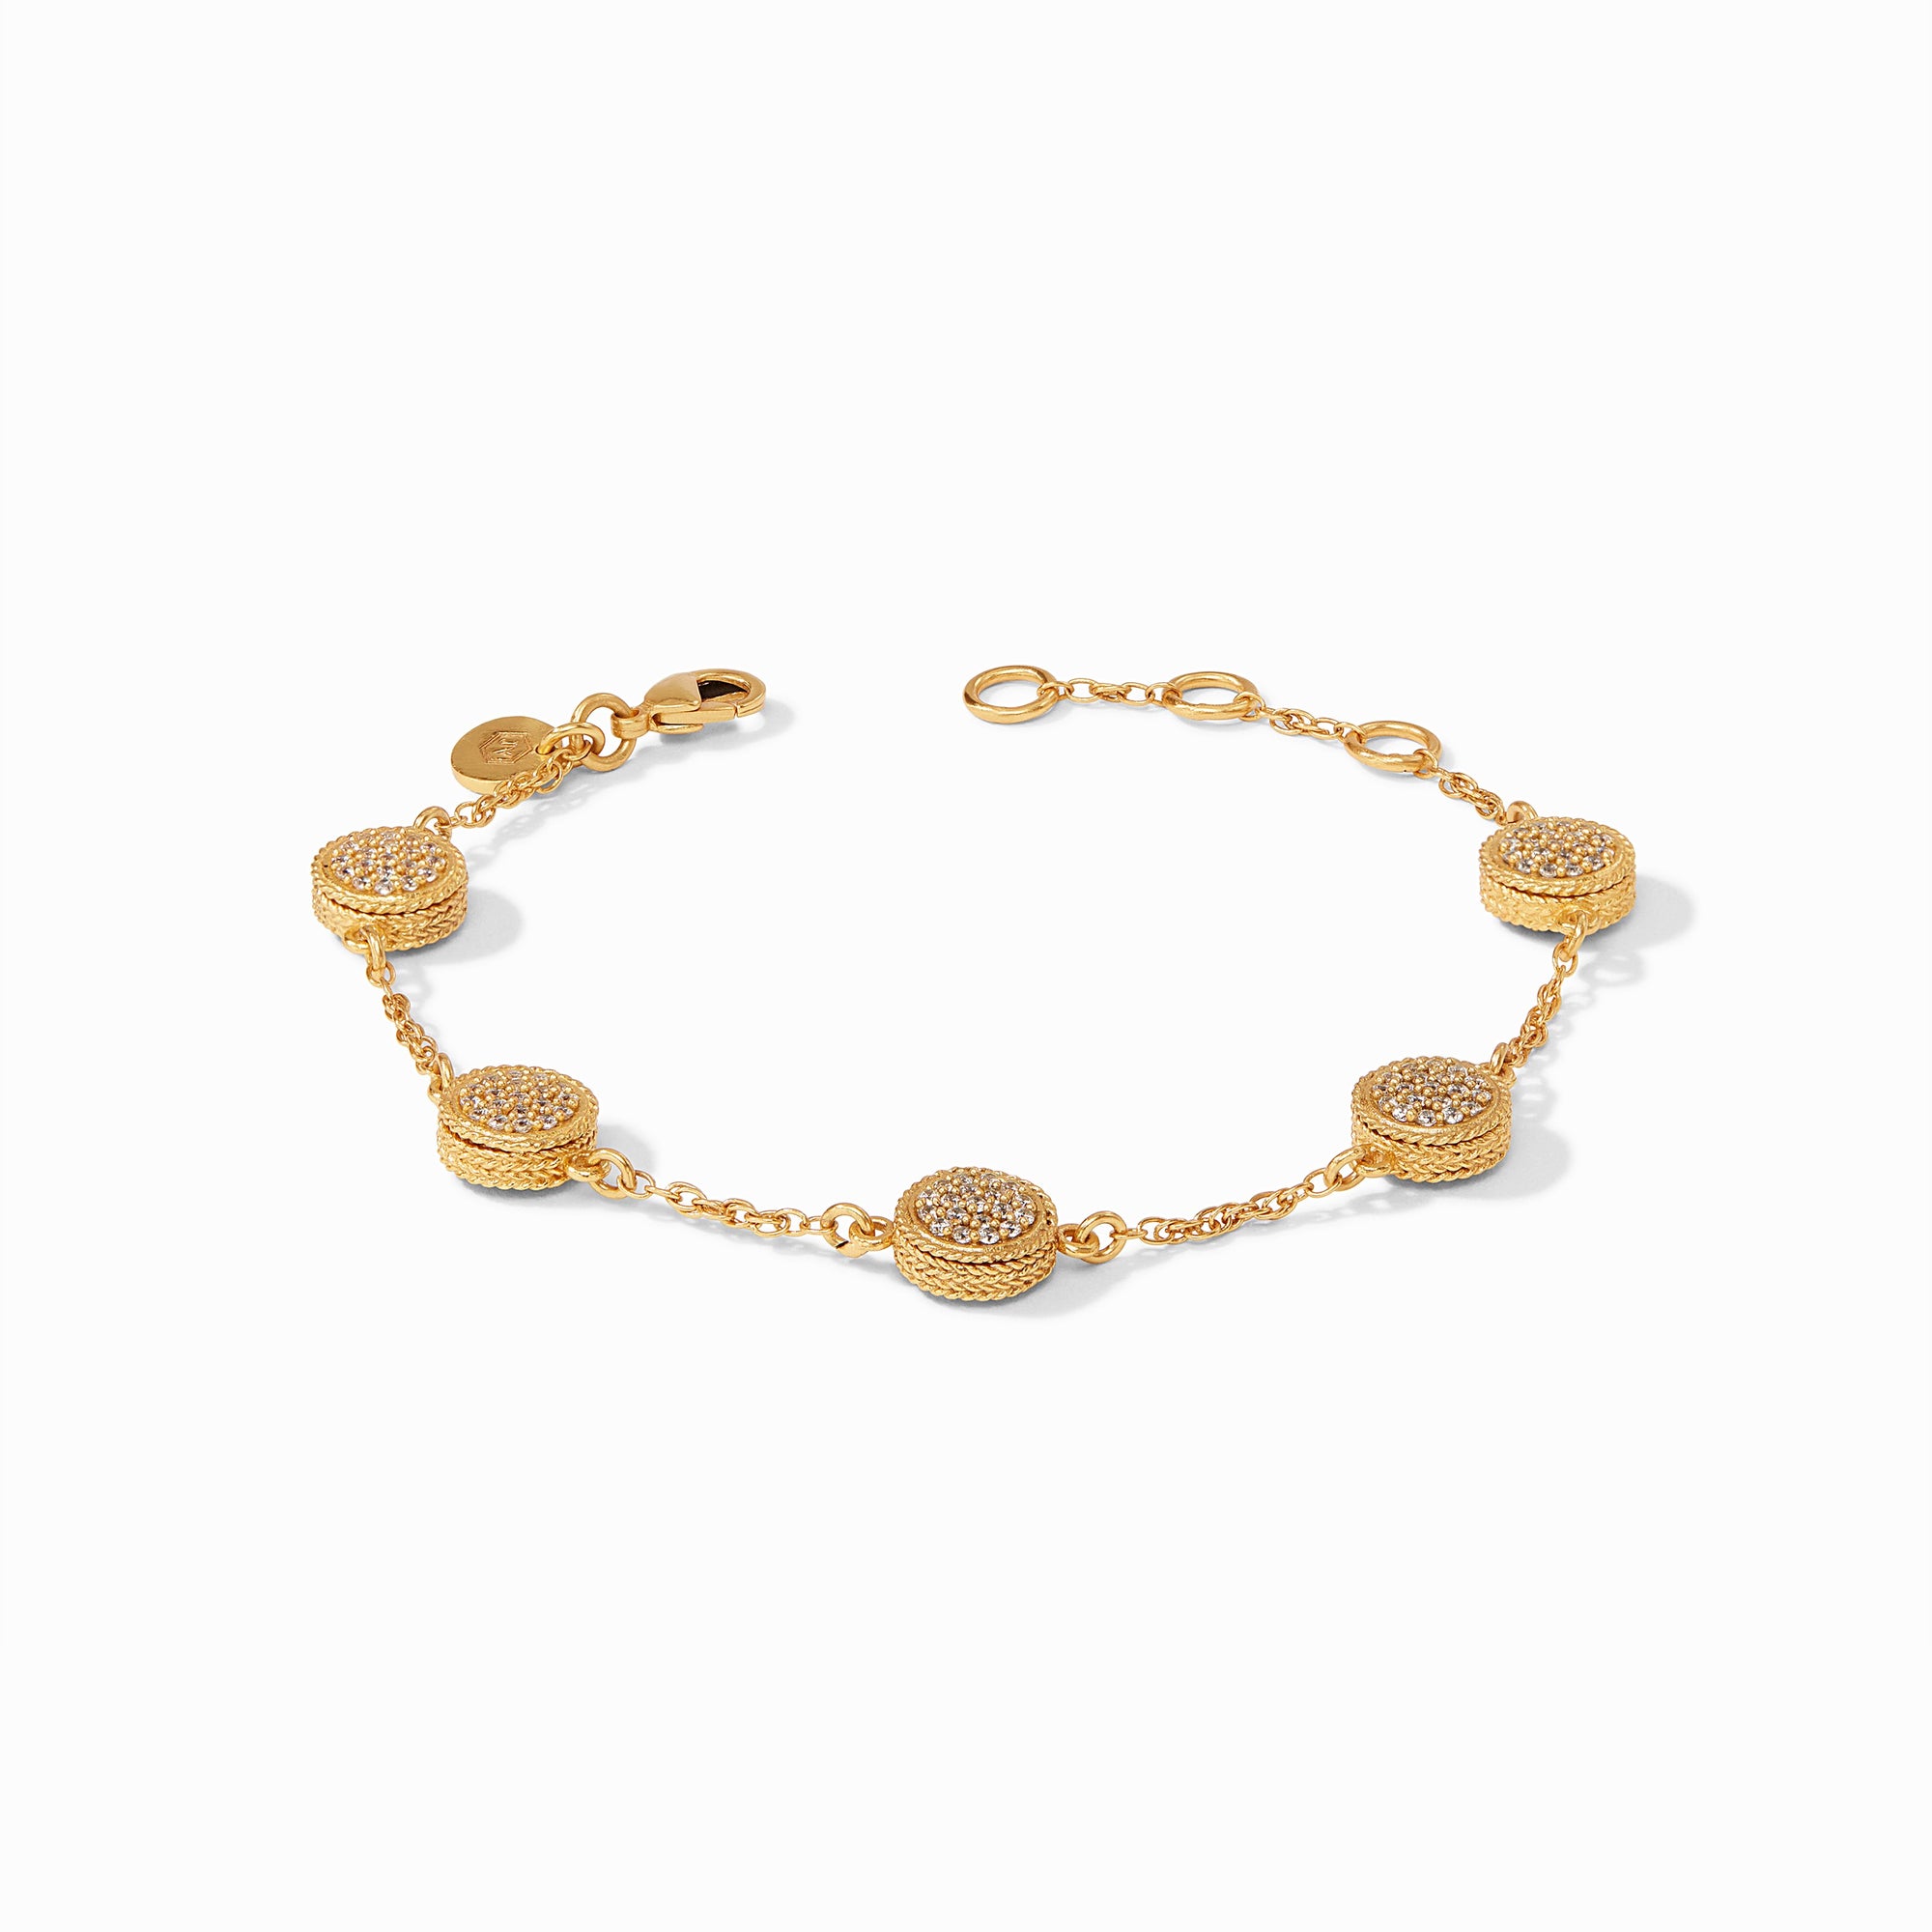 carousel, Centered view of the Windsor Delicate Bracelet with Pave Stations